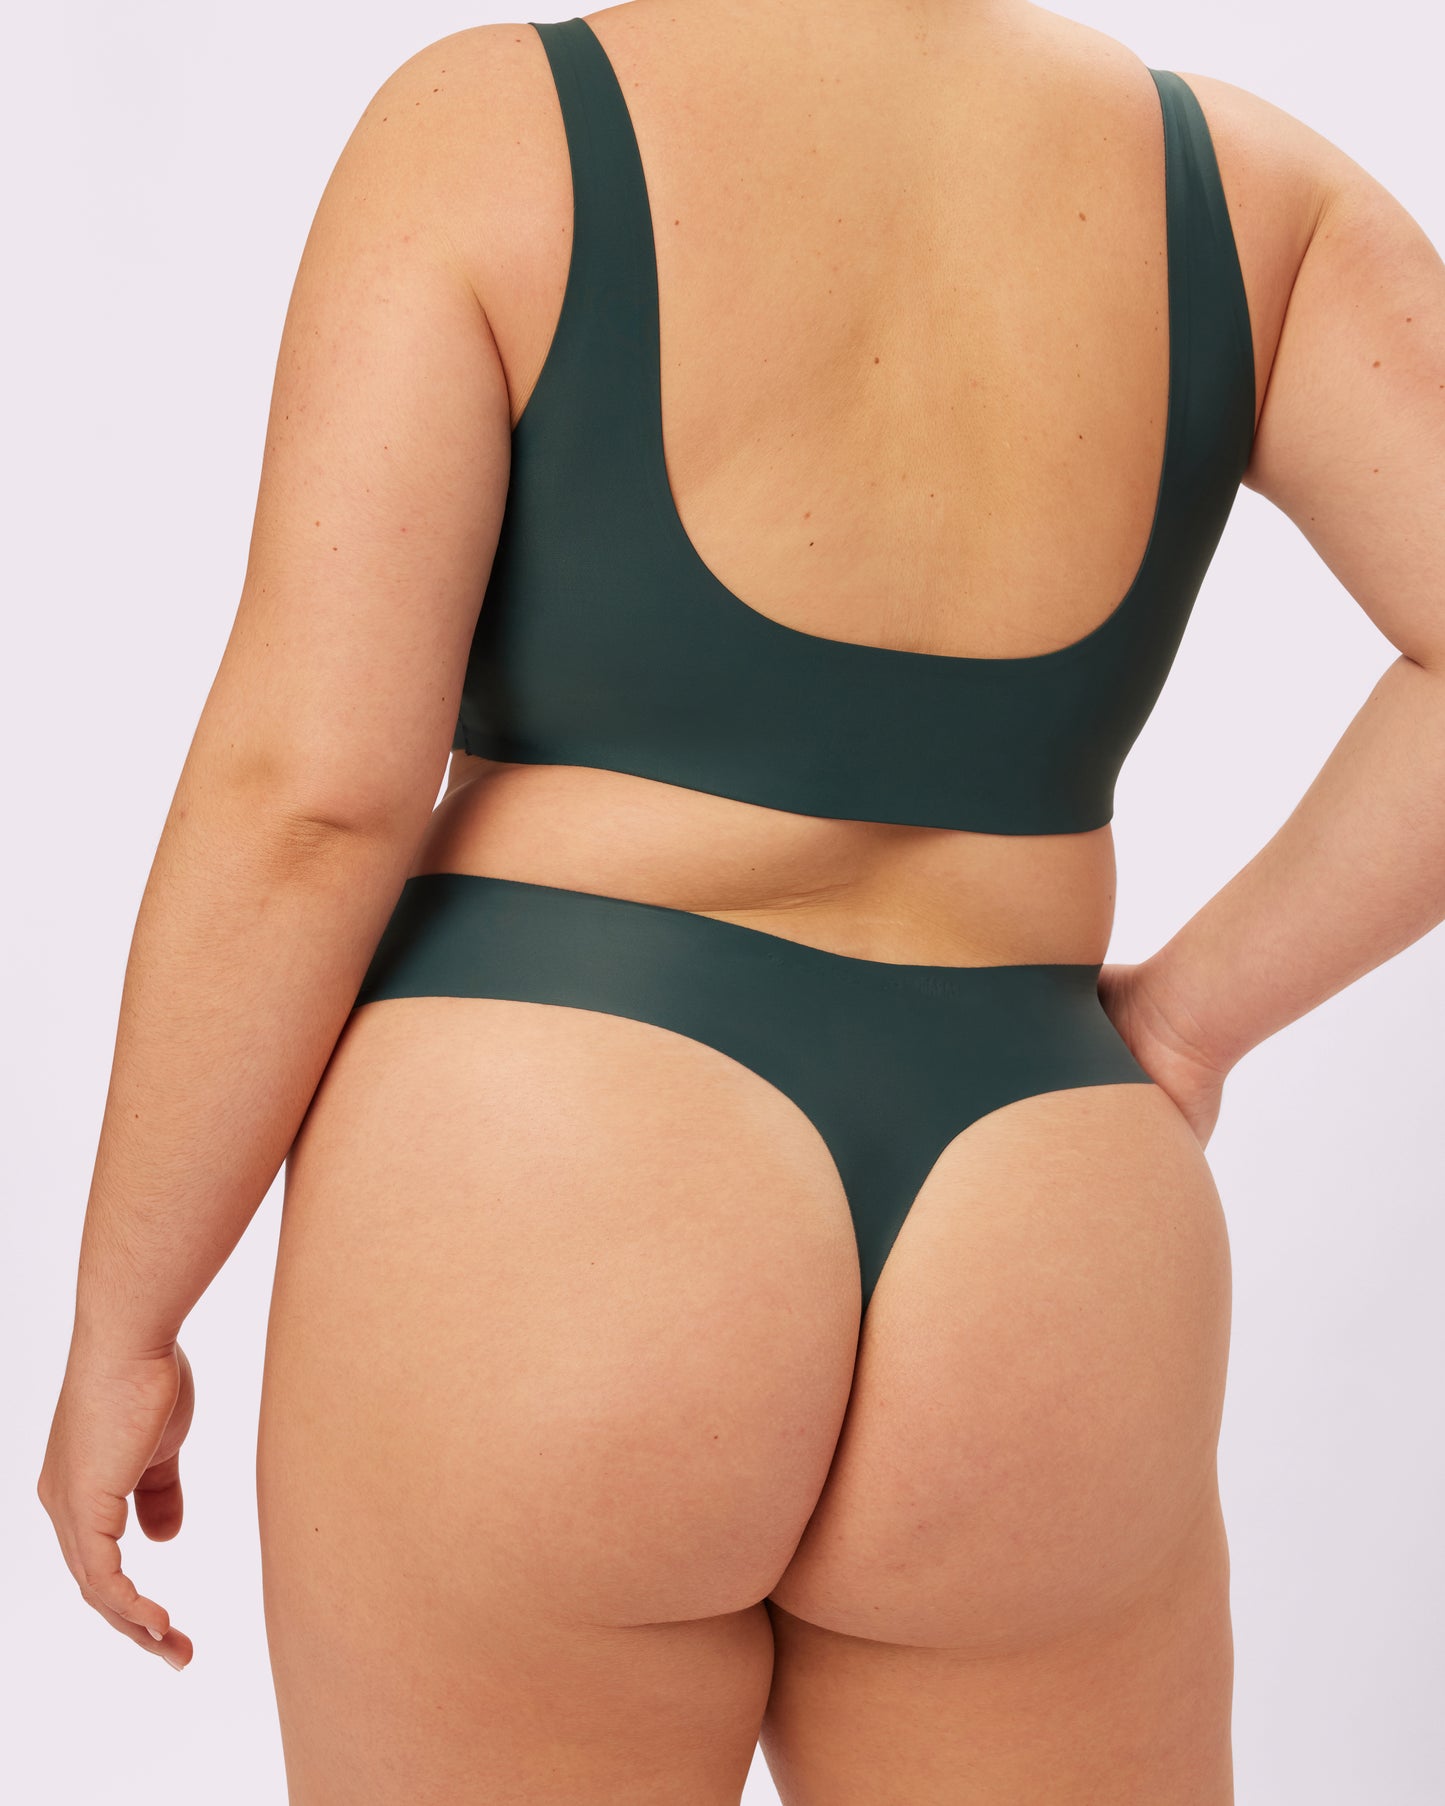 These invisible thongs are being called 'the best' for wearing